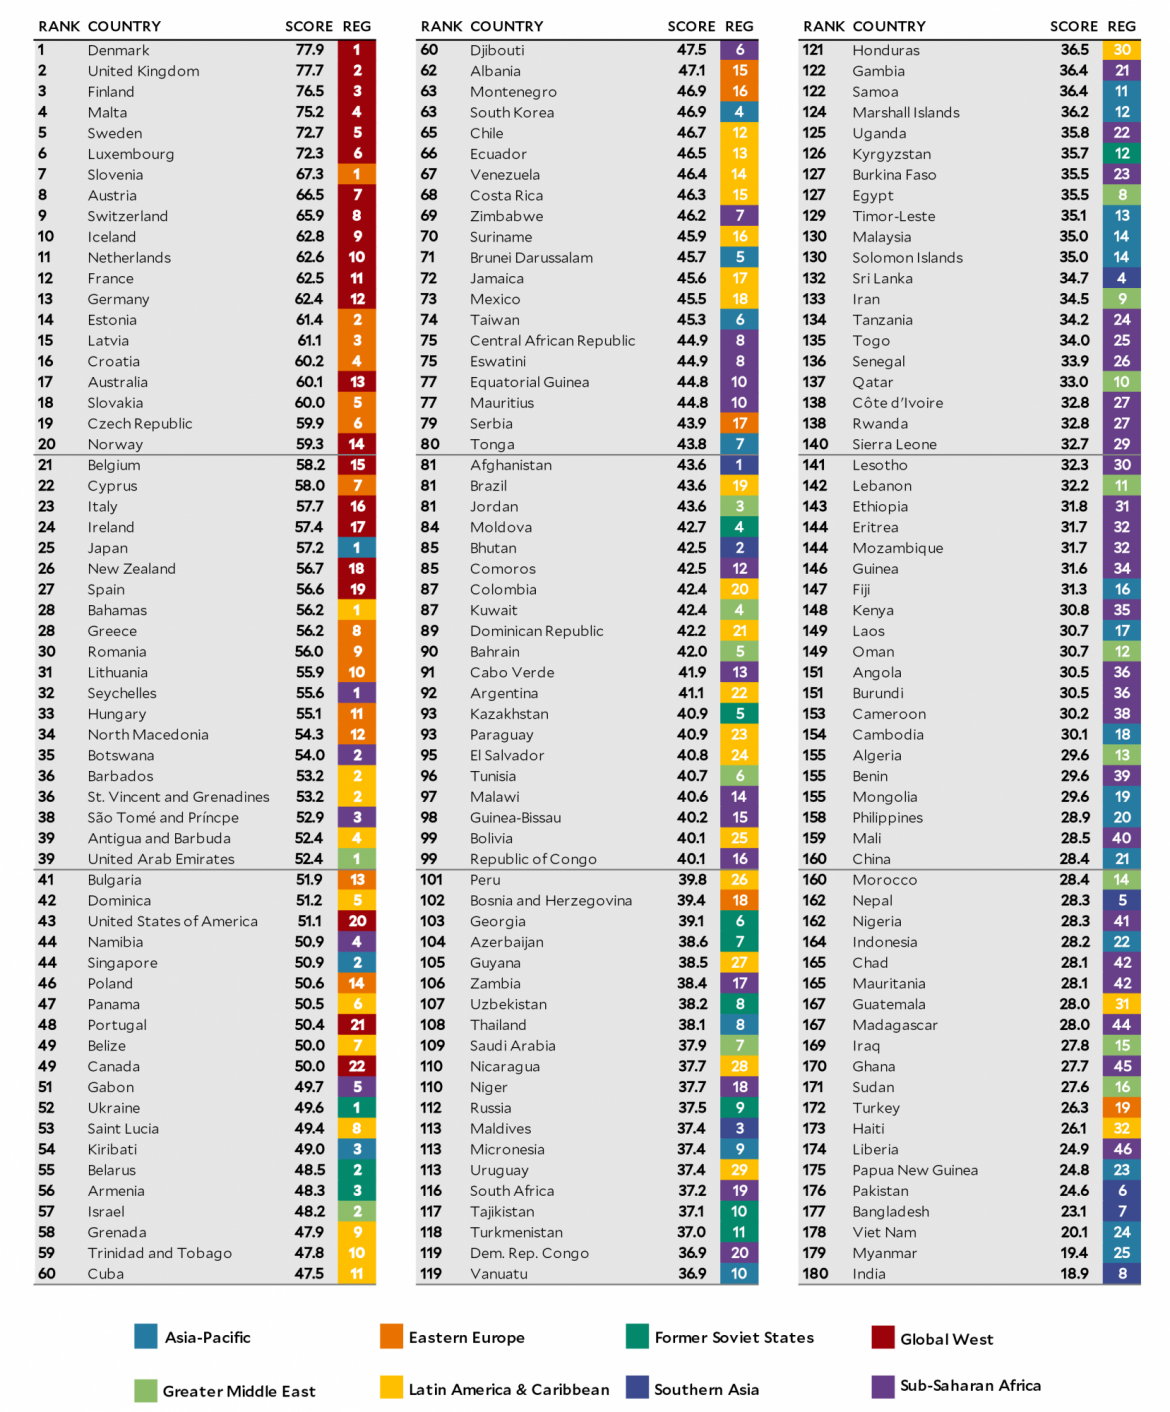 EPI ranking depicted in a table with grey background with the scores of global regions indicated by a specific color